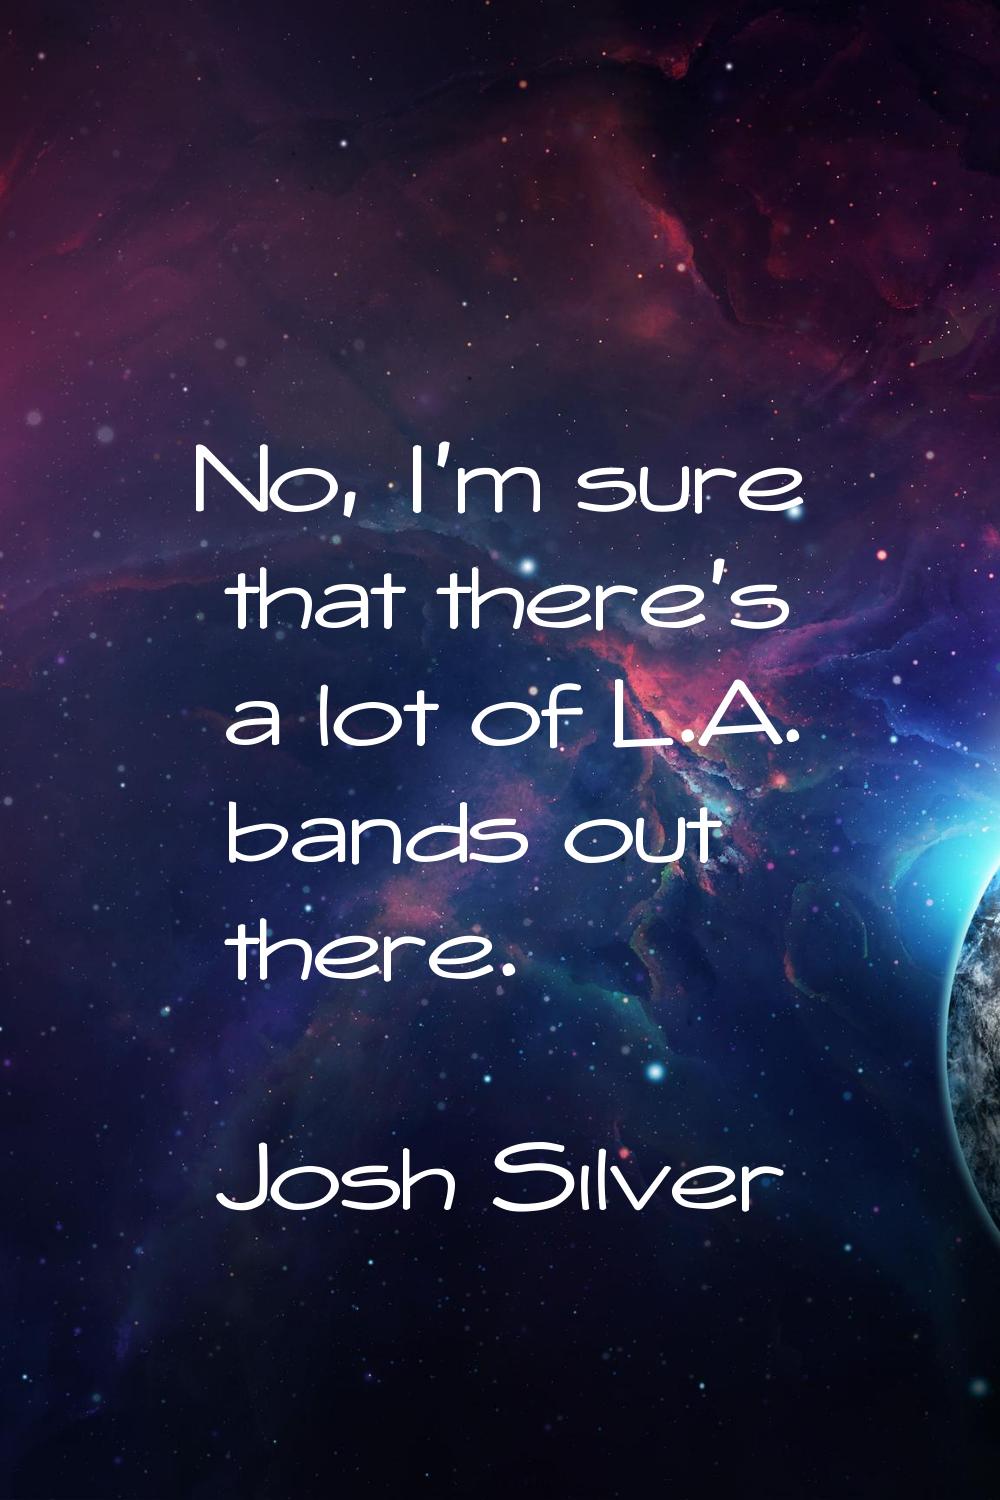 No, I'm sure that there's a lot of L.A. bands out there.